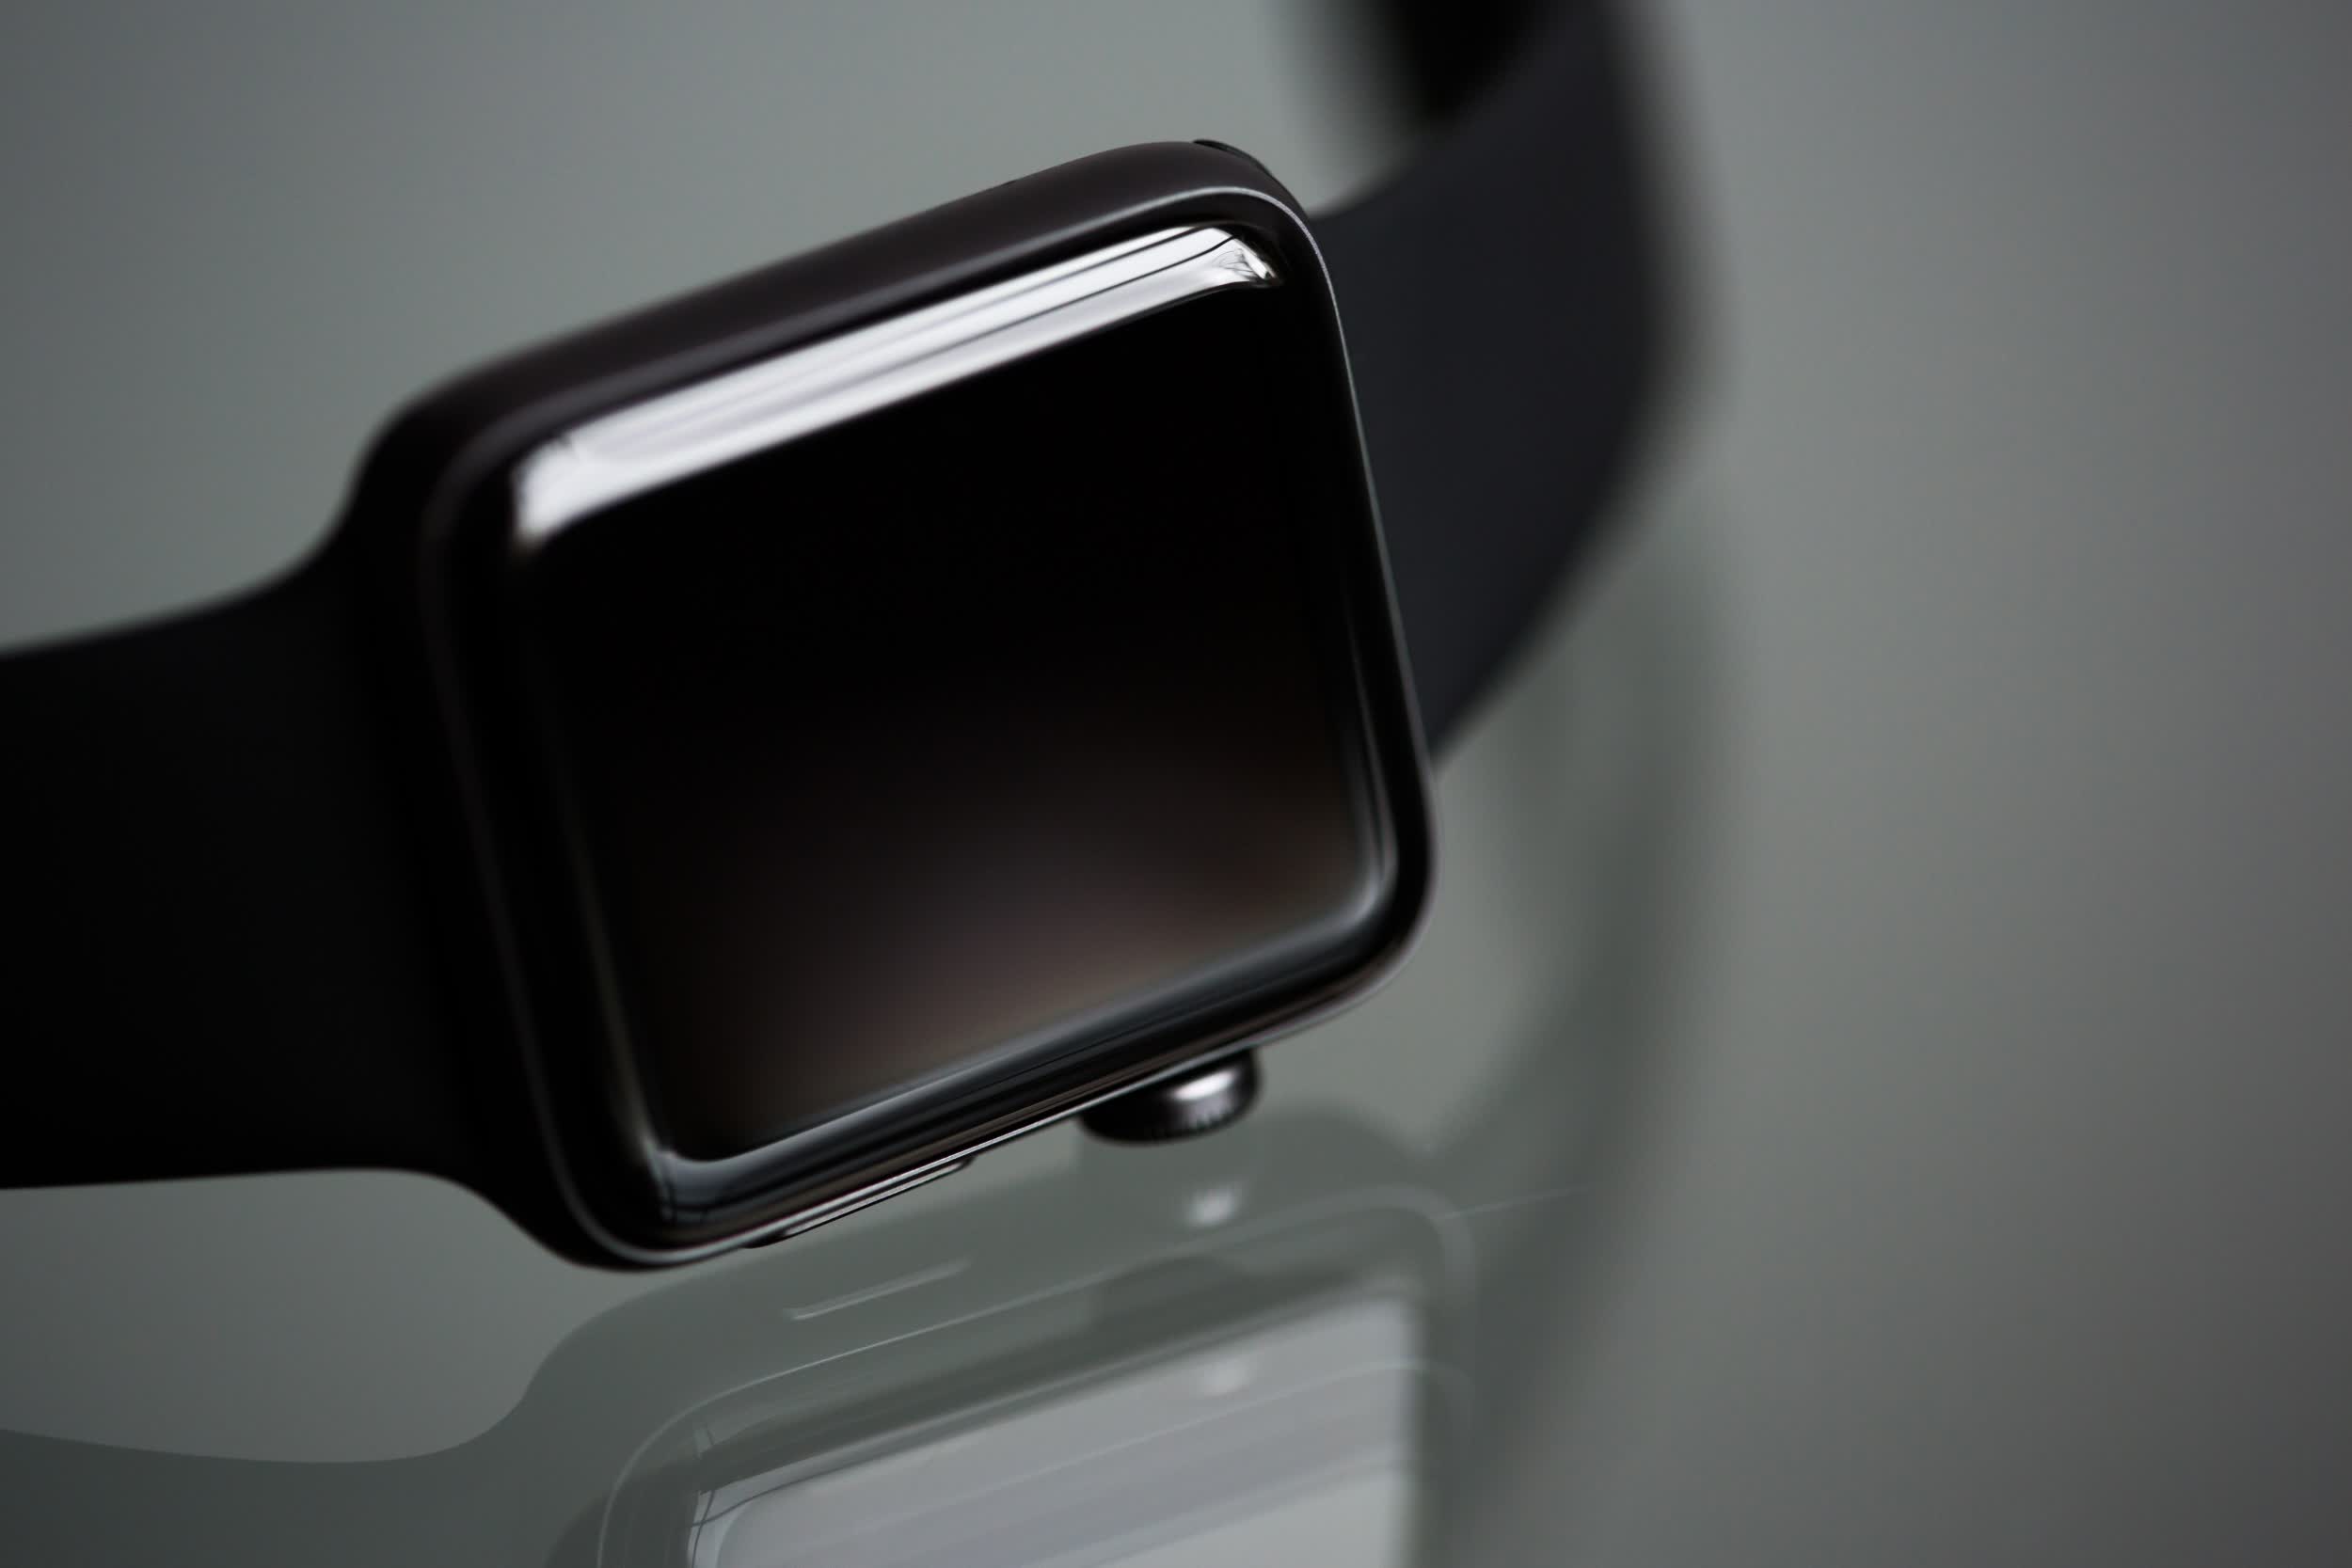 Wearables remain in a slump as global market continues to face lingering challenges